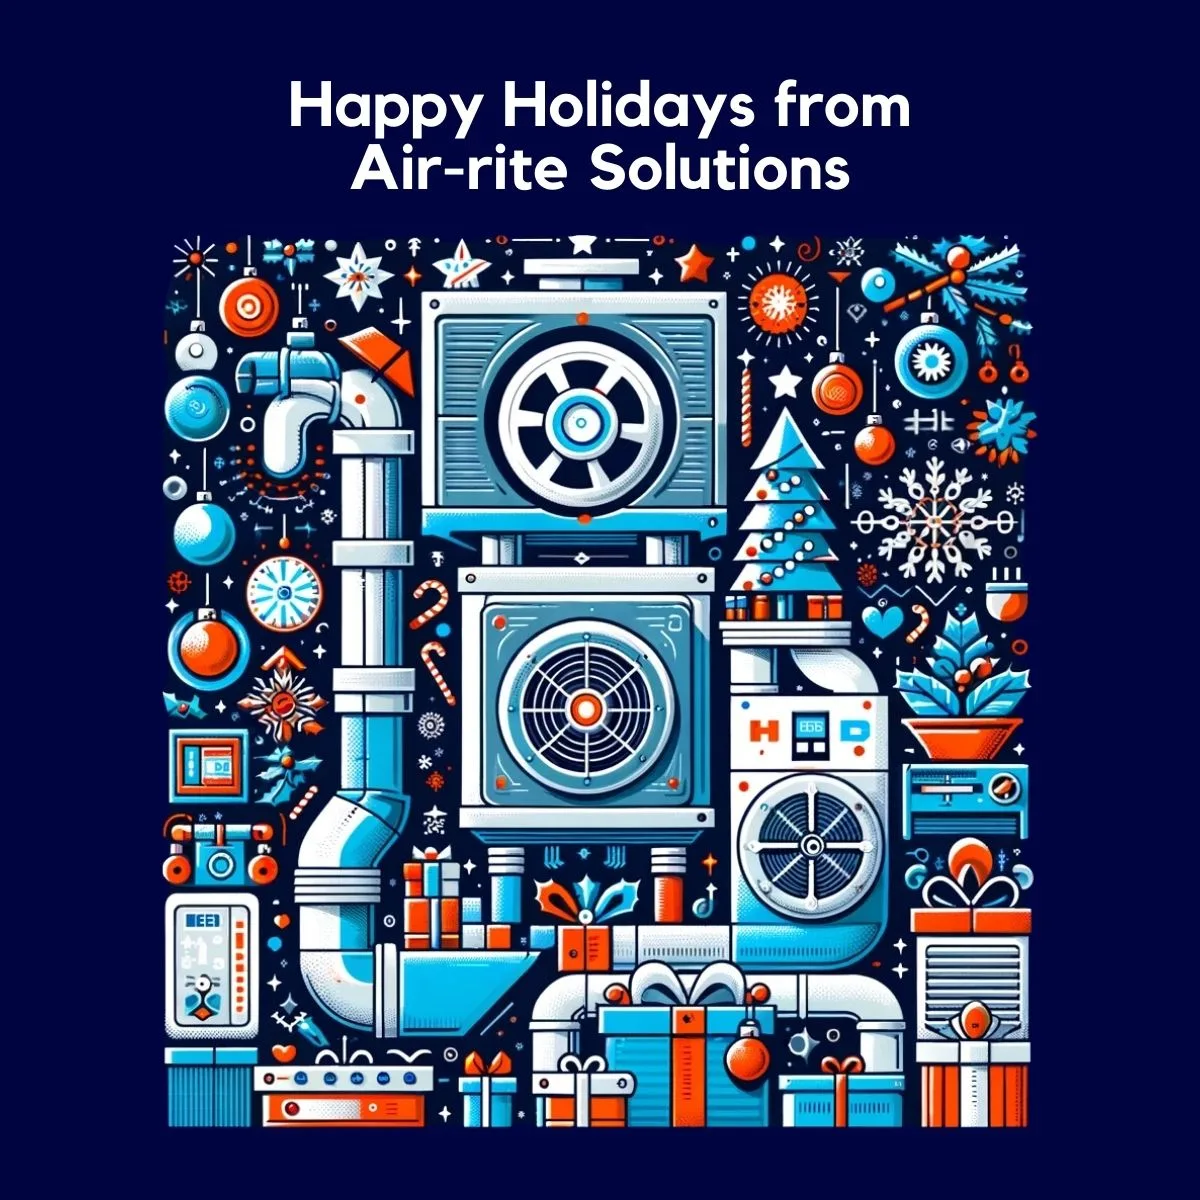 Air-rite Solutions Christmas Graphic